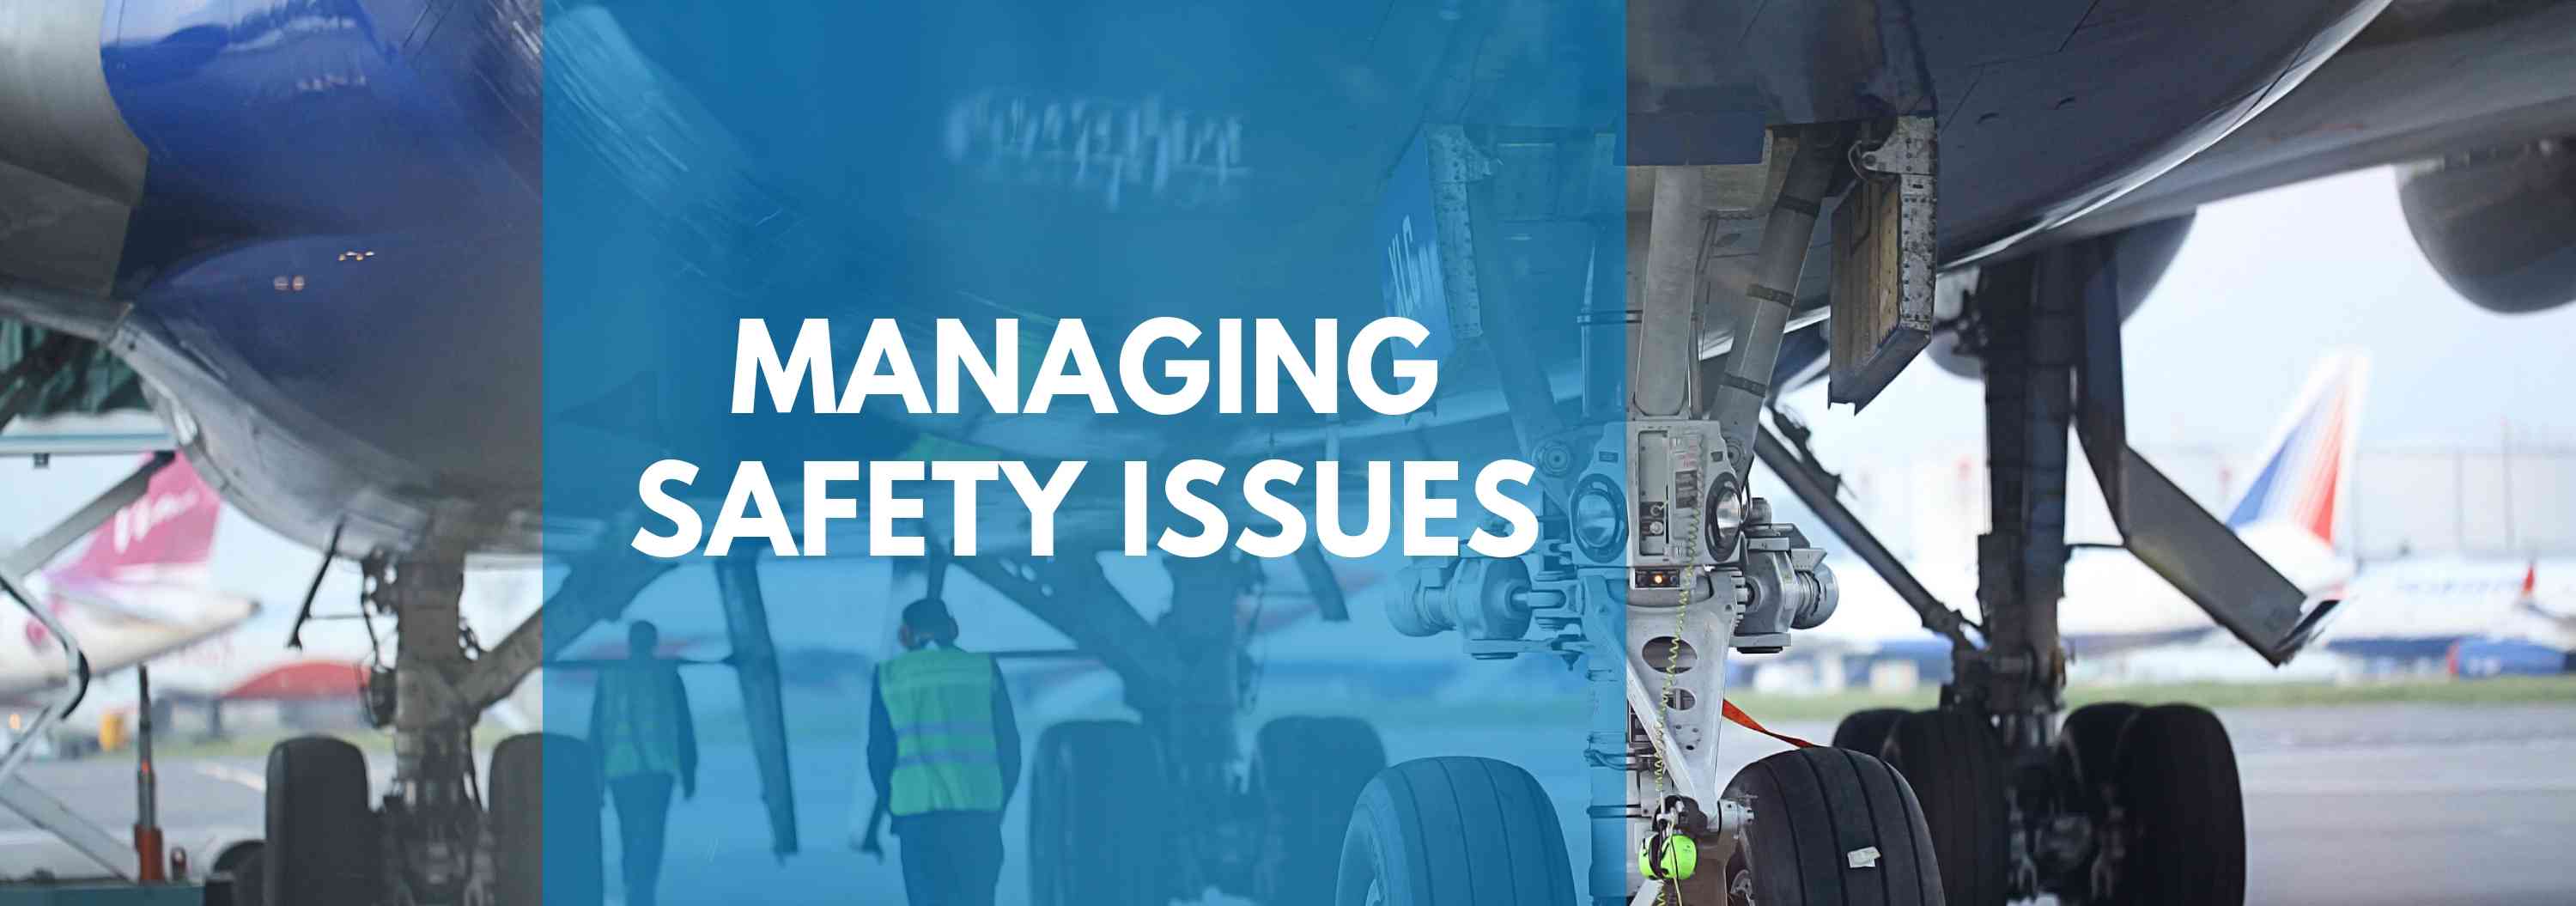 Managing Safety Issues